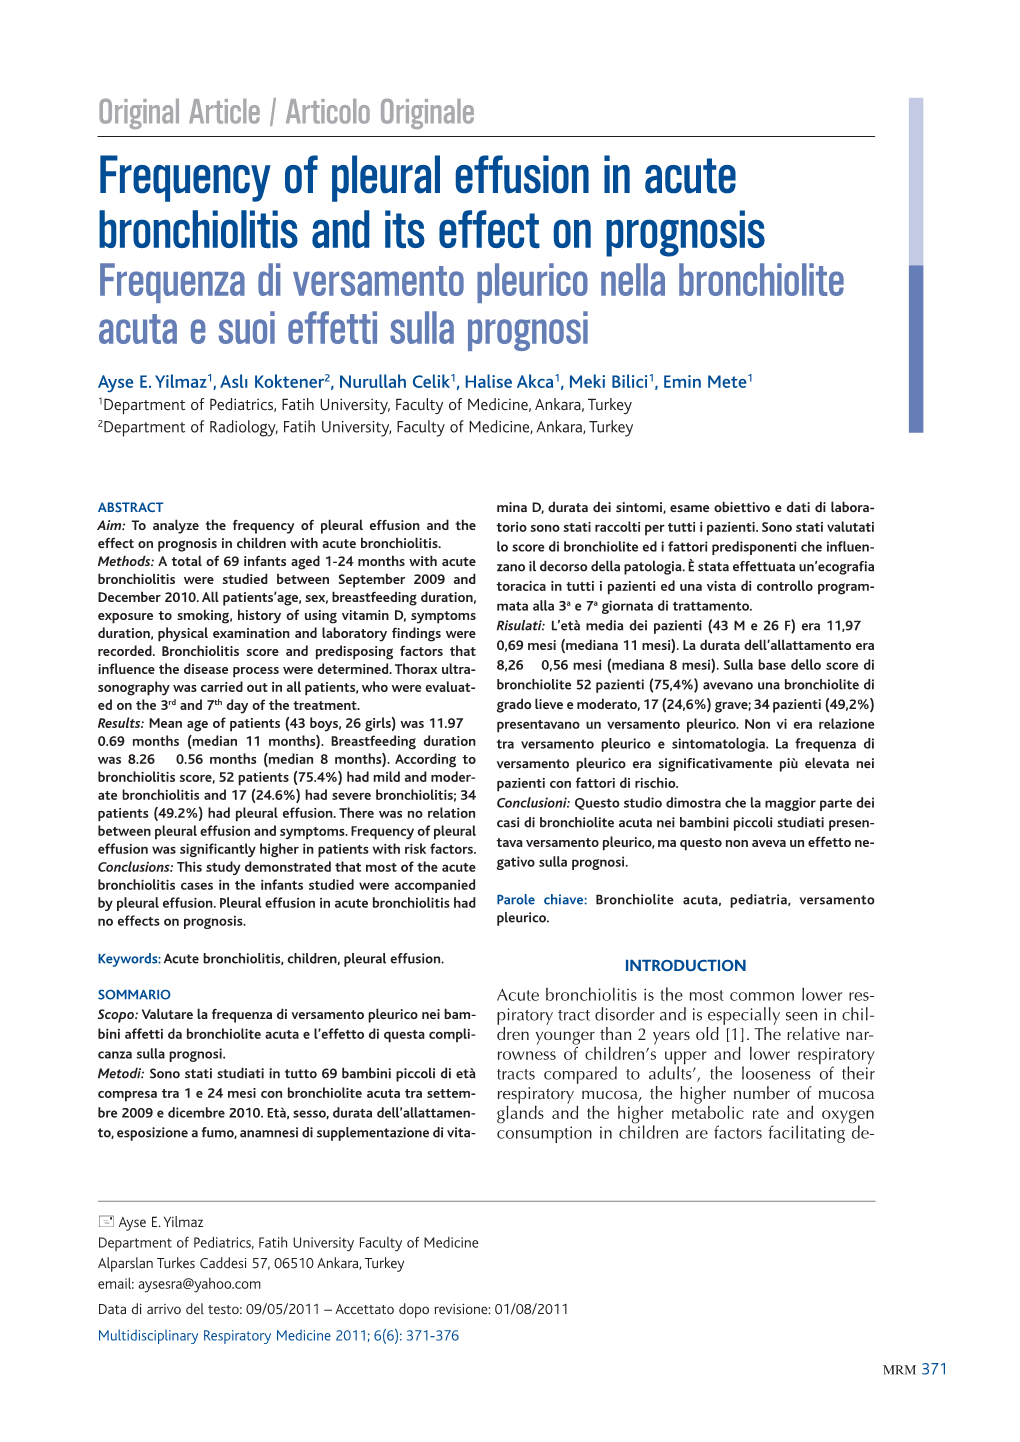 Frequency of Pleural Effusion in Acute Bronchiolitis and Its Effect On